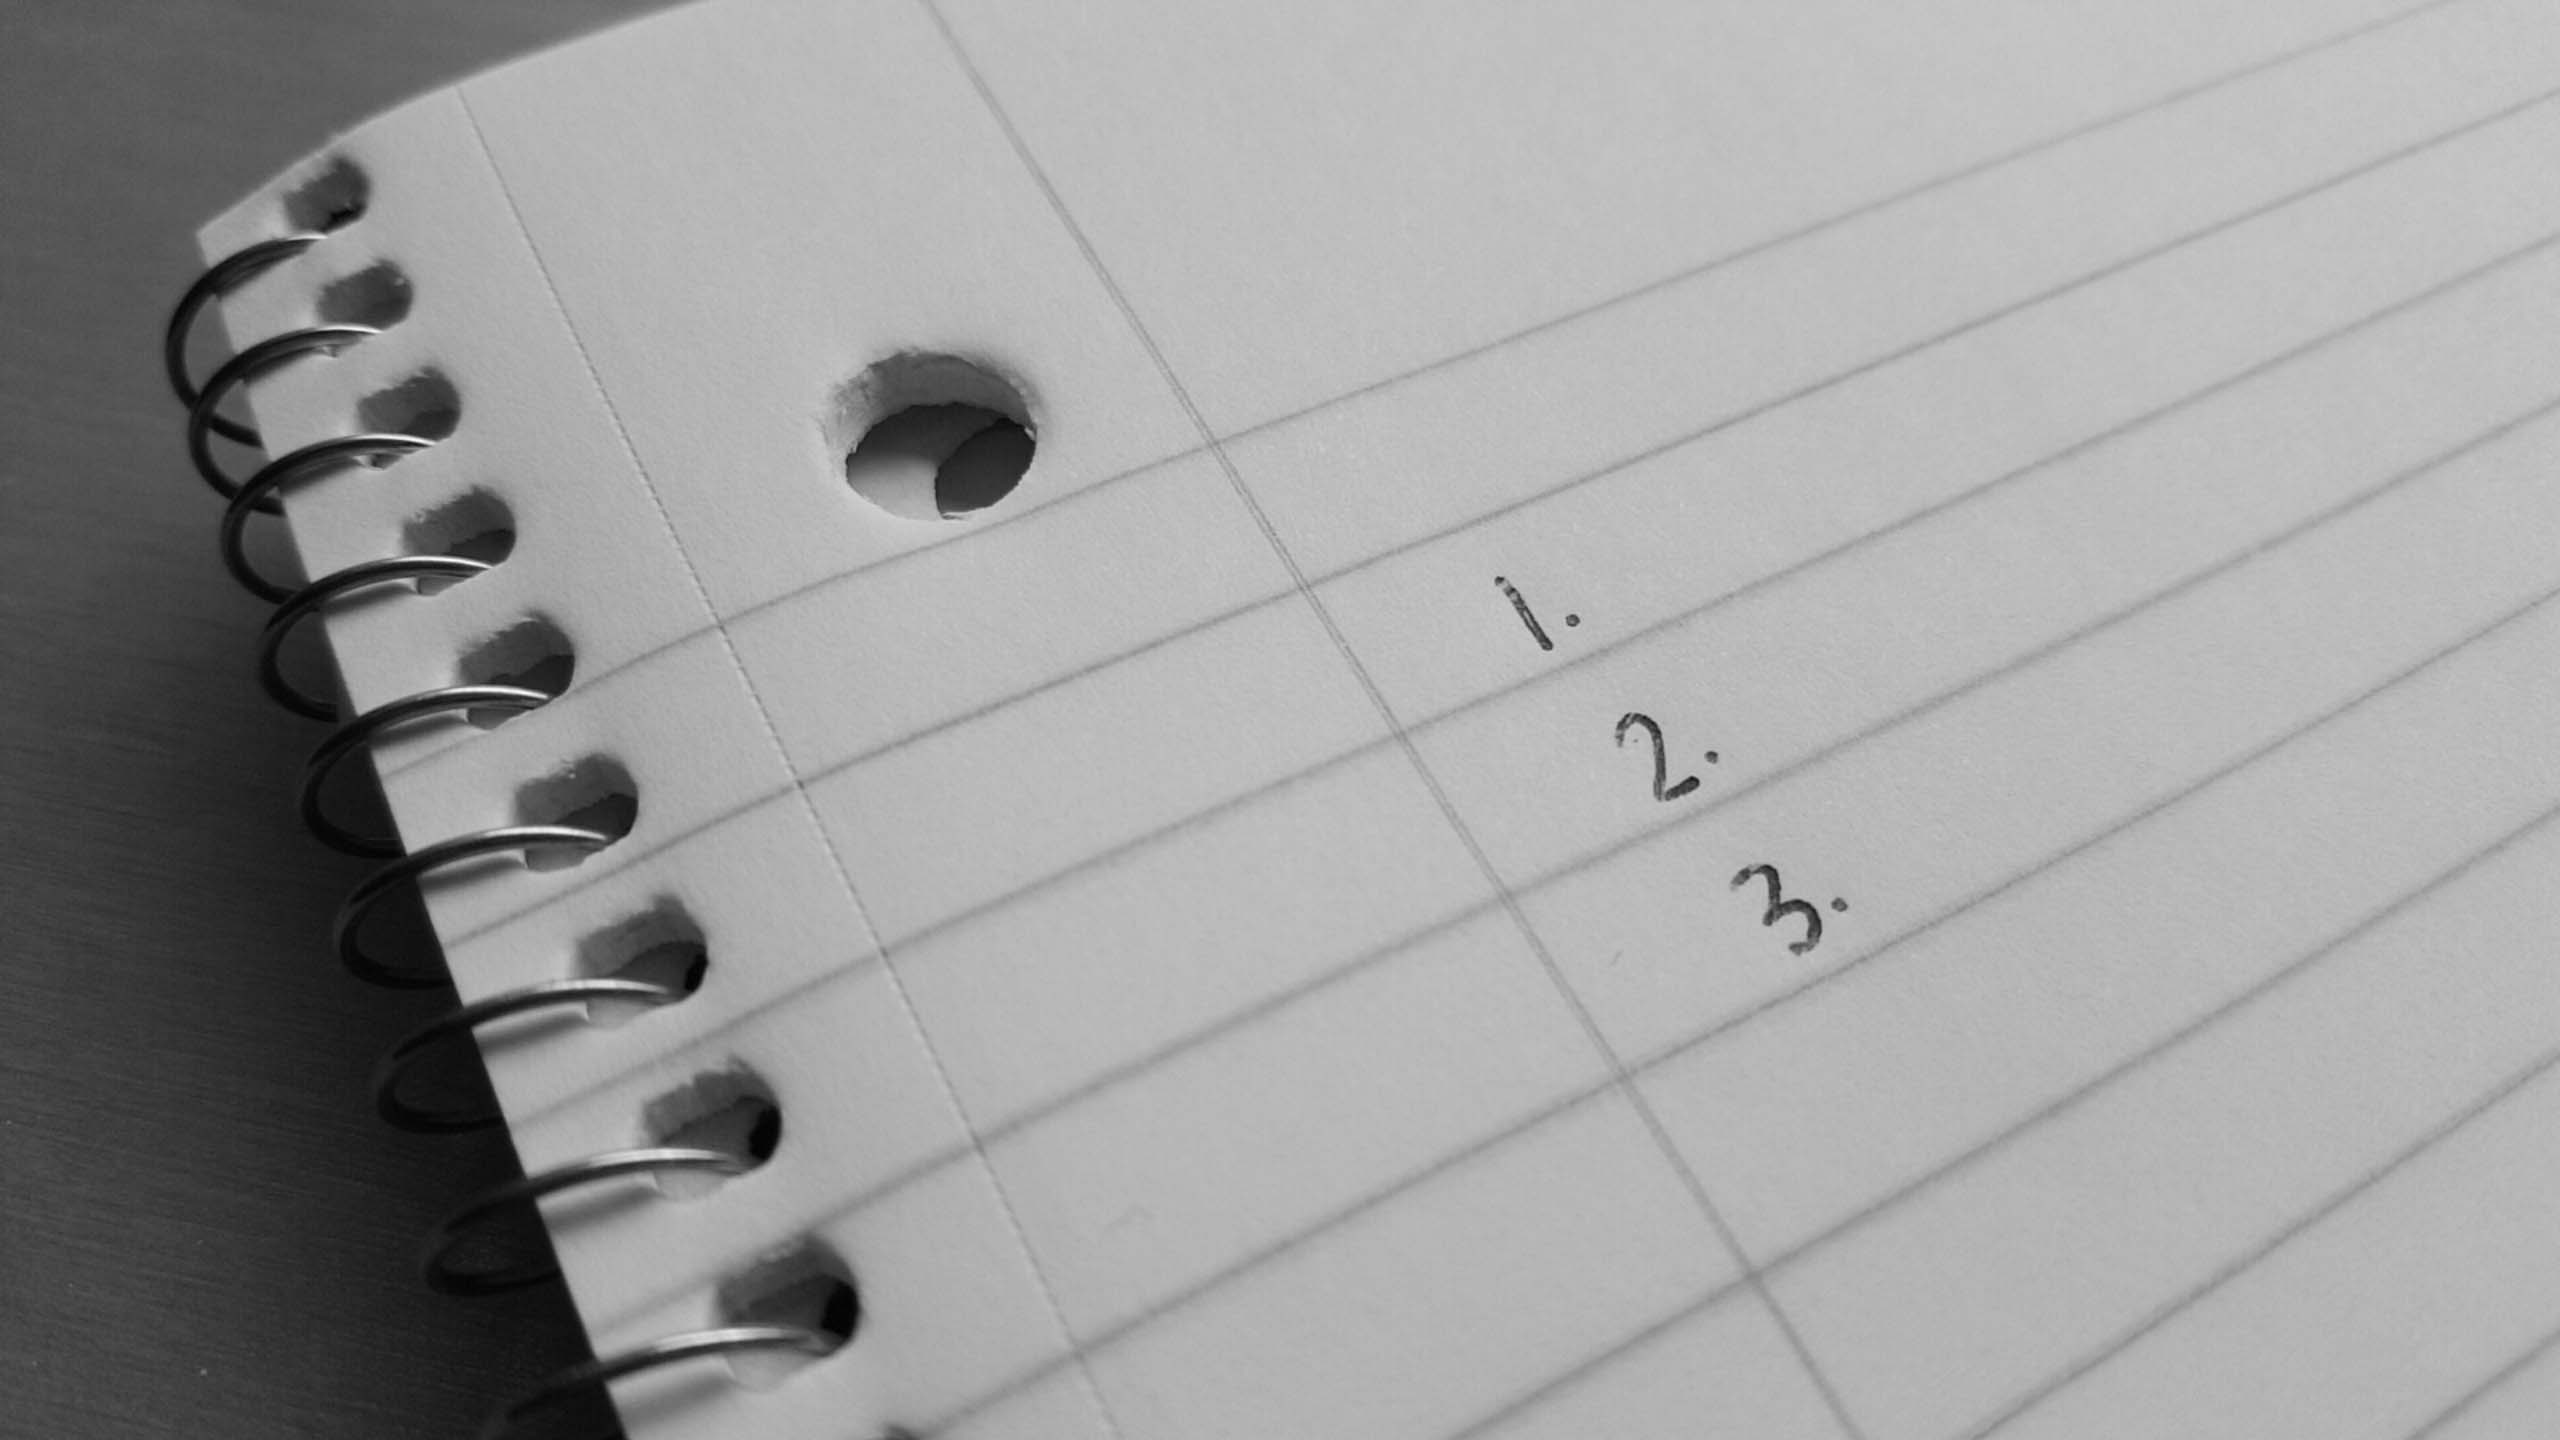 black and white close-up of handwritten steps 1-2-3 on a page of a spiral notebook